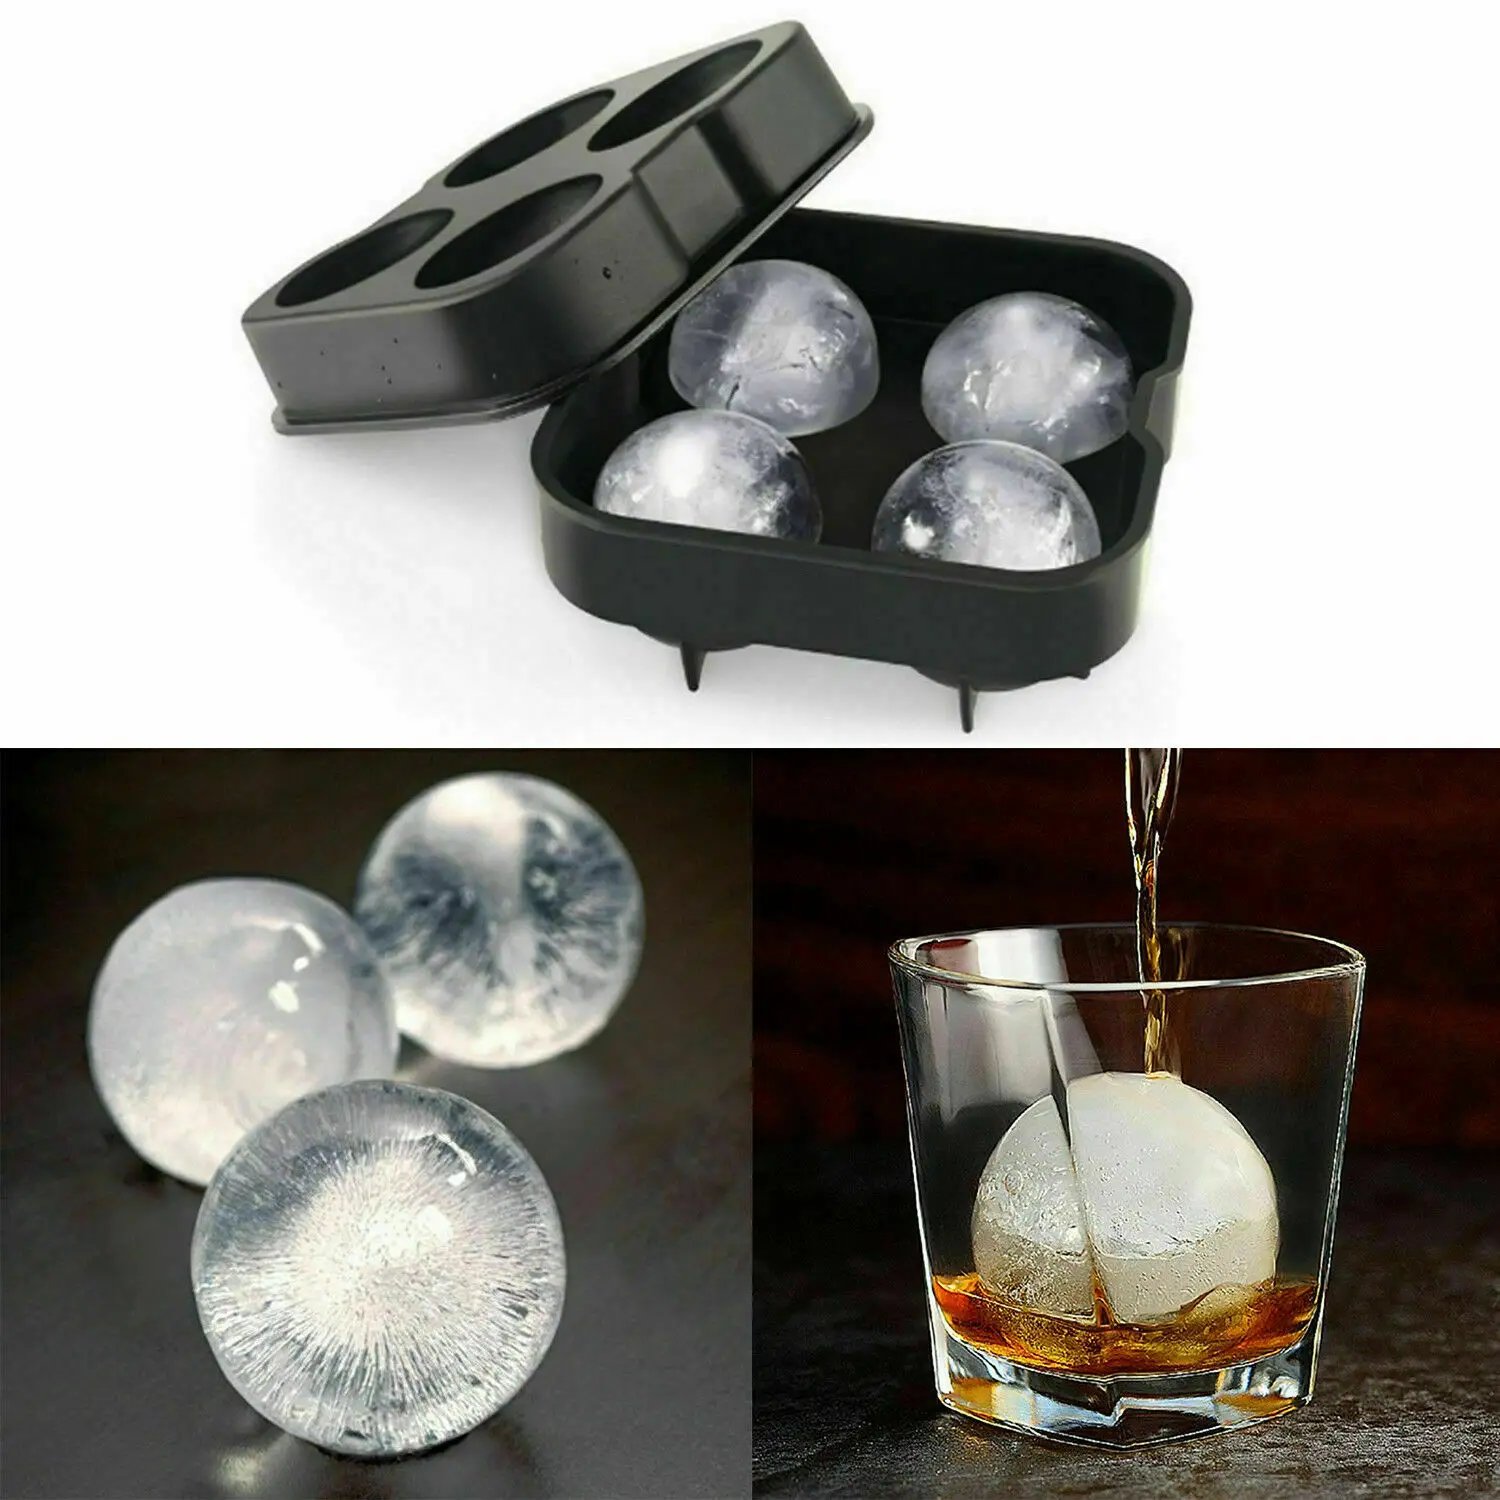 Luv America Ice Cube Trays Silicone Set of 2 Cocktail Beverages and More.! Sphere Round Ice Ball Maker and Large Square Ice Cube Mold for Chilling Bourbon Whiskey 